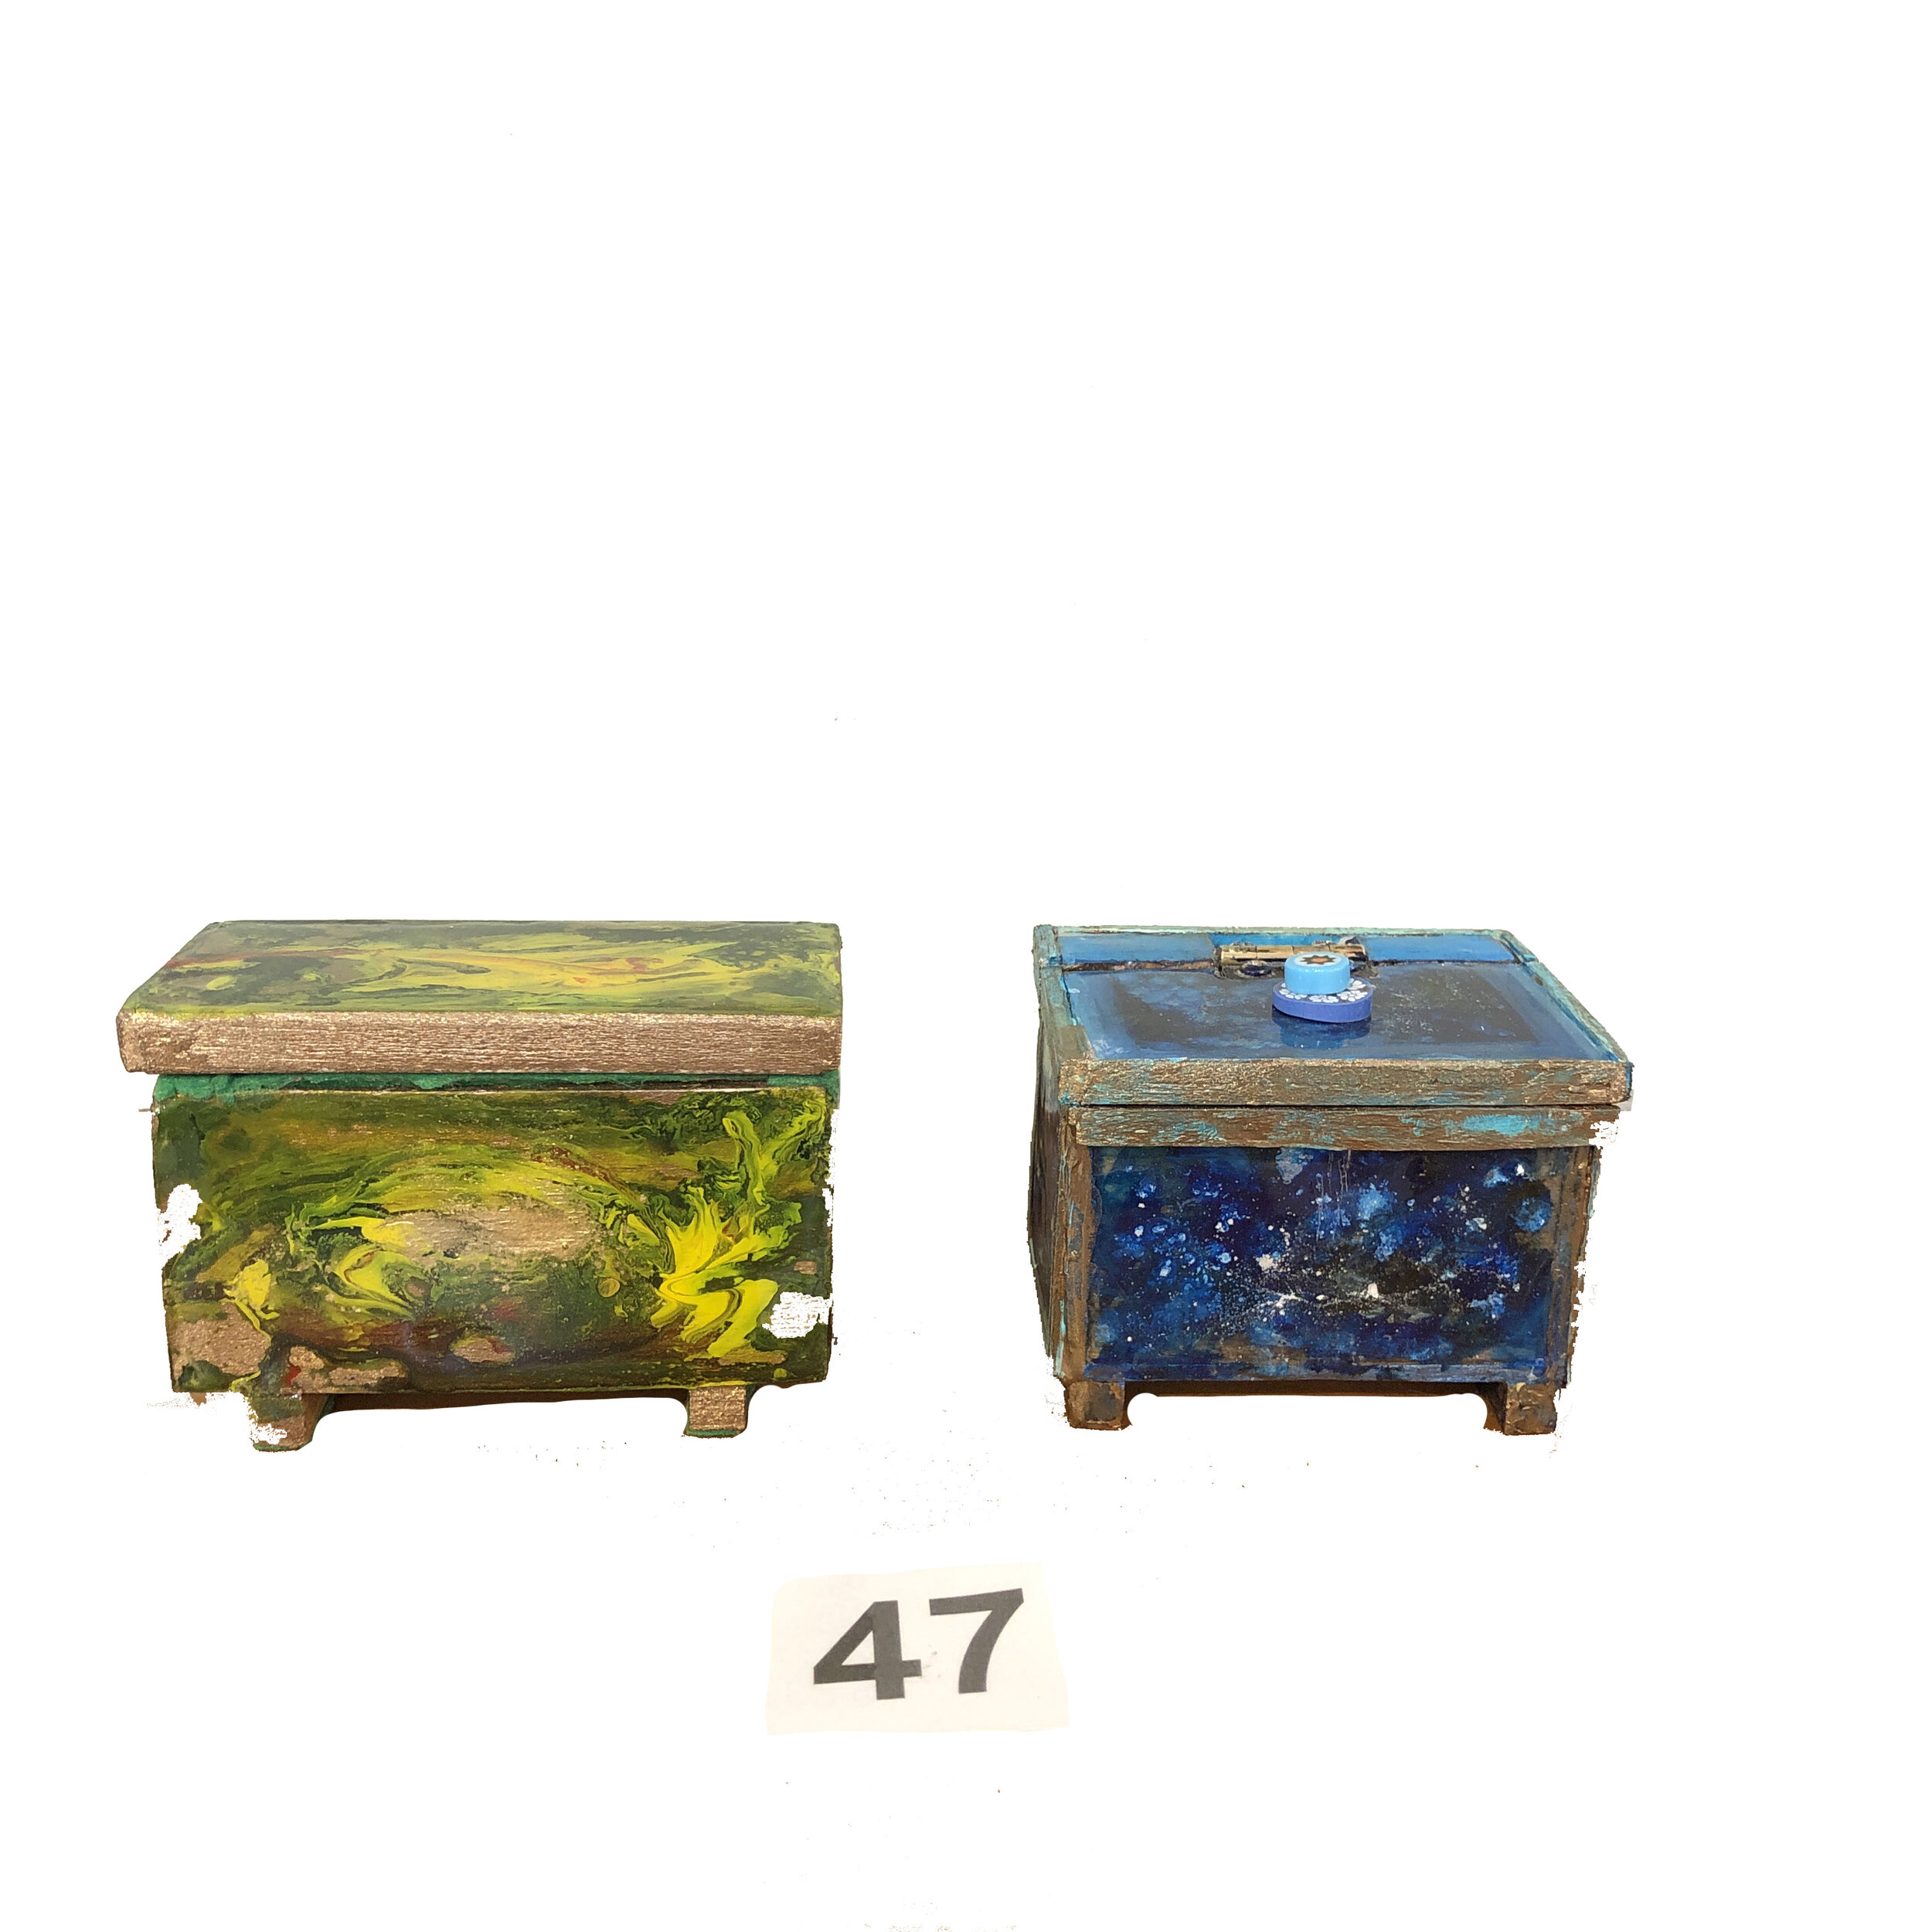  “Handcrafted Boxes - Small” 